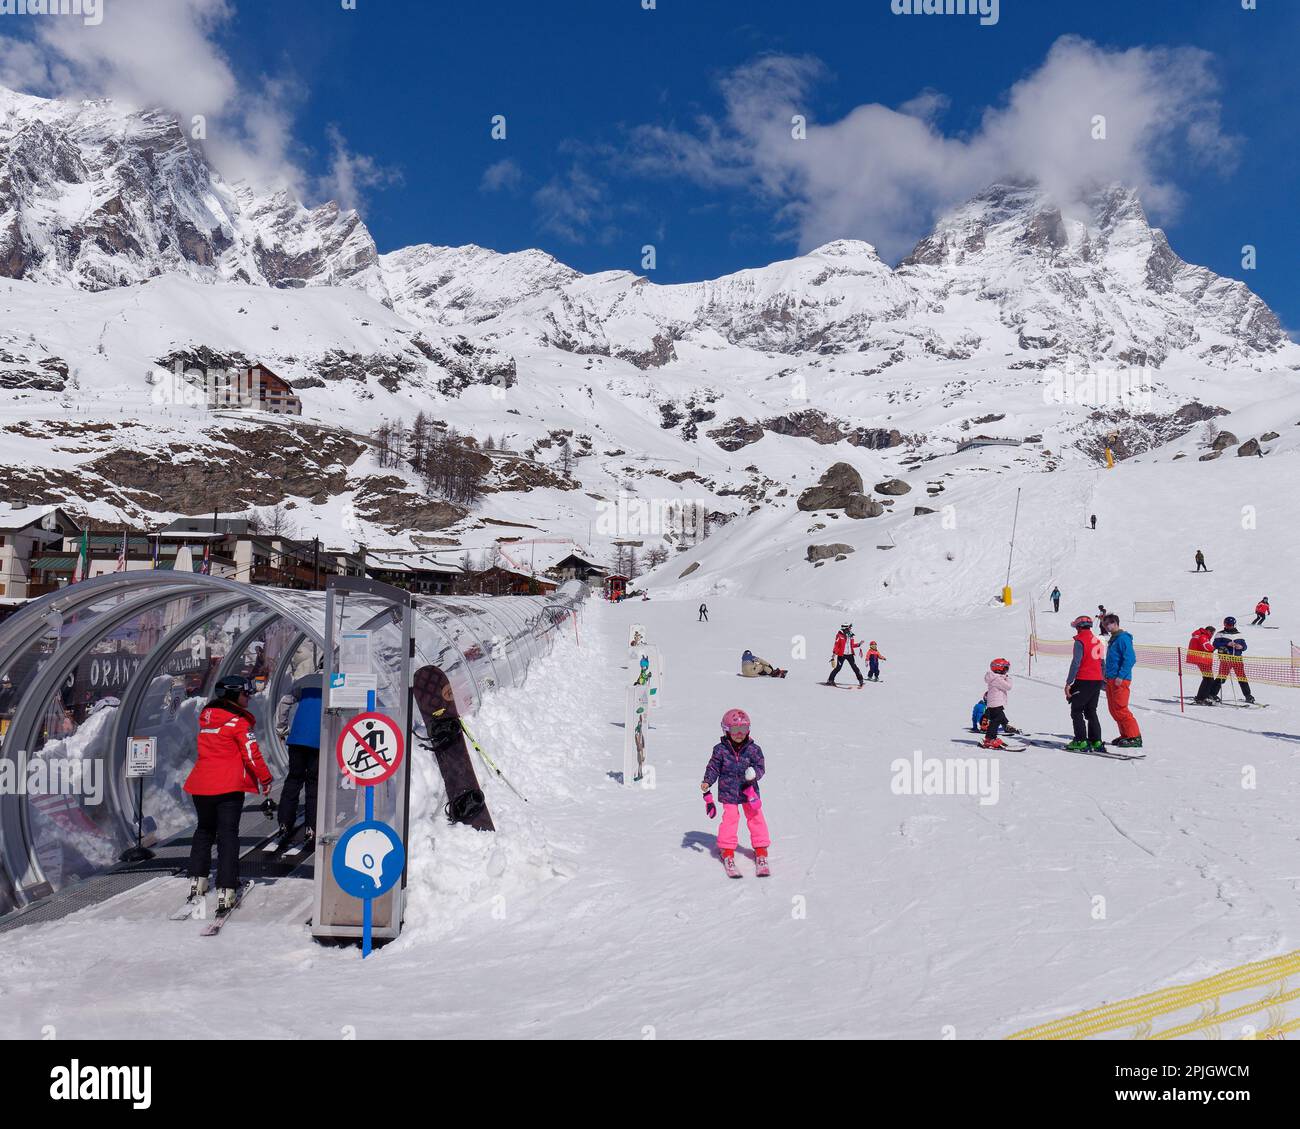 Nursery slope skiers in Breuil-Cervinia ,Aosta Valley Italy, with a polytunnel ski lift and the snow covered Cervino mountain aka Matterhorn behind. Stock Photo